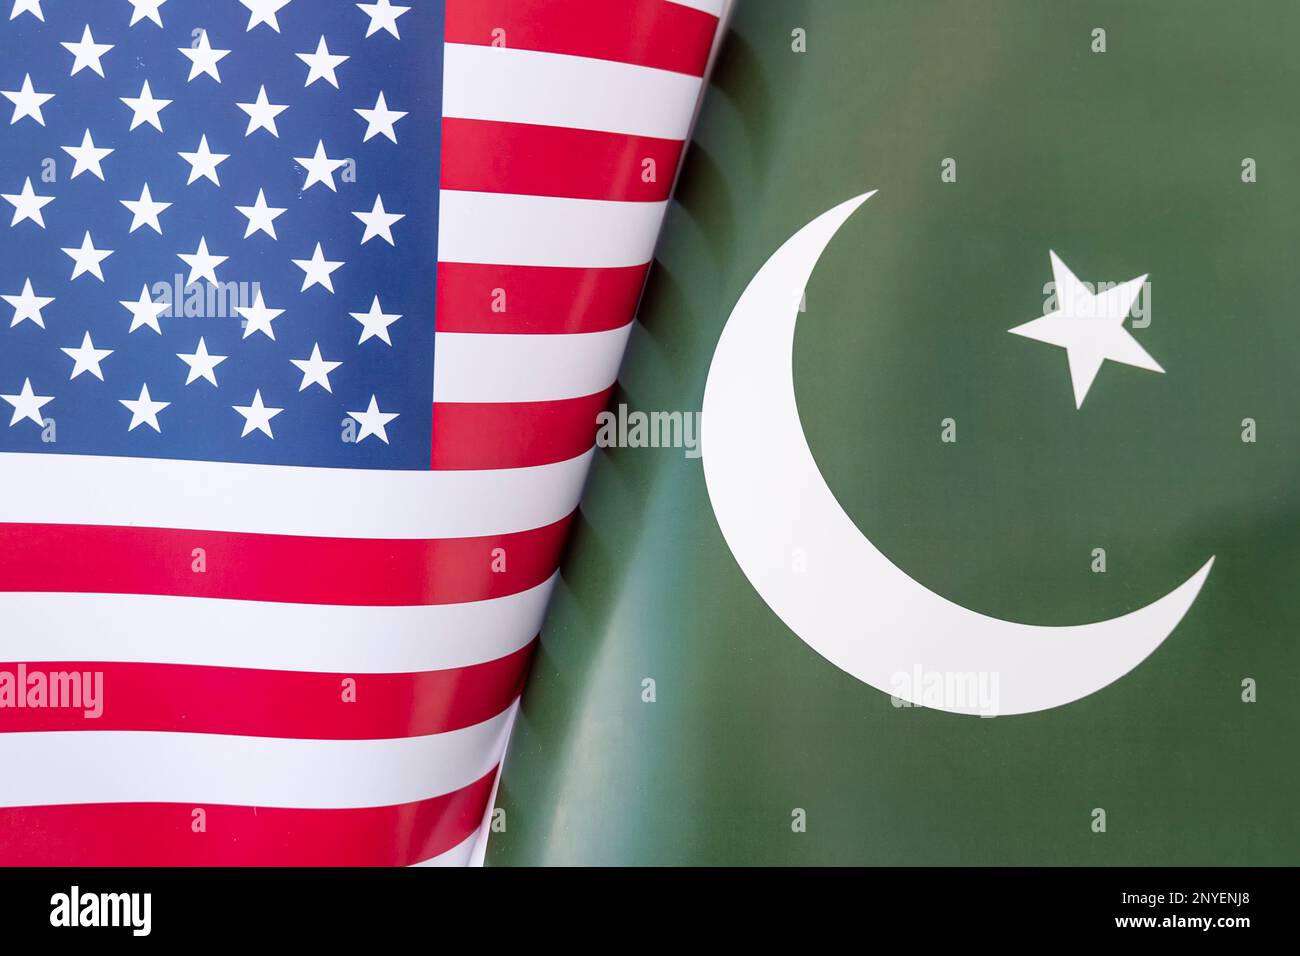 Background of the flags of the USA and pakistan. The concept of interaction or counteraction between the two countries. International relations. polit Stock Photo